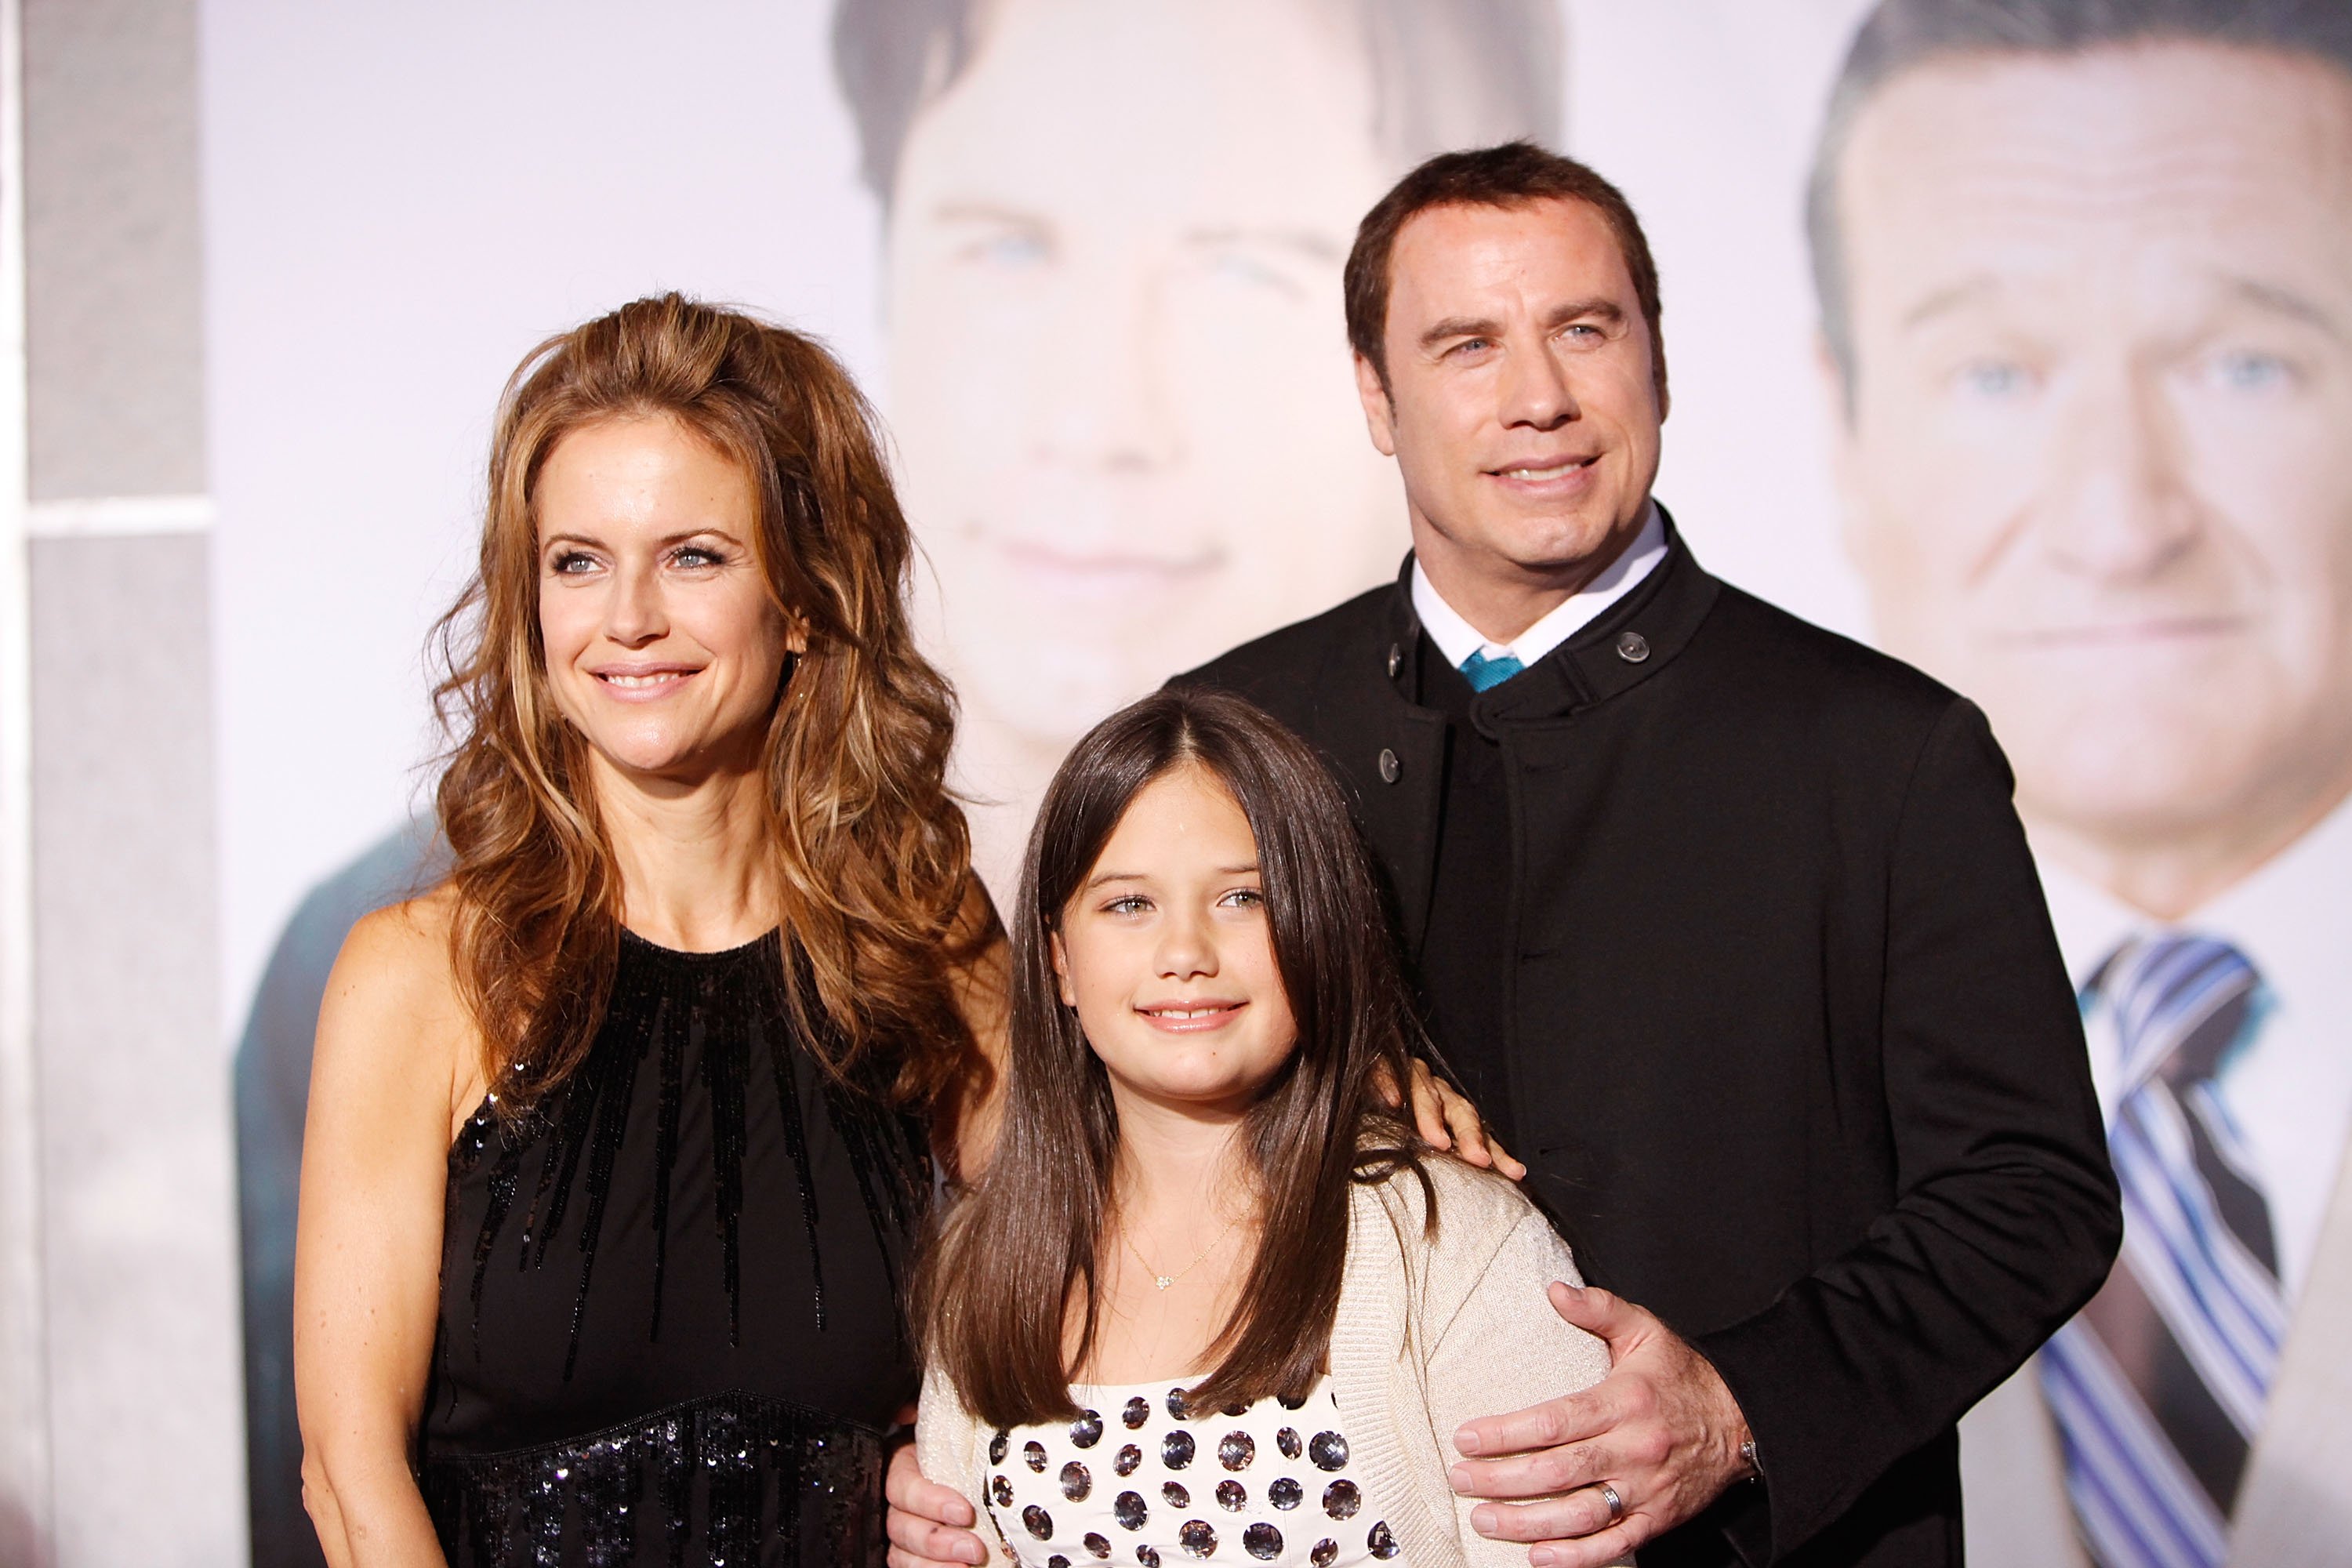 Kelly Preston, Ella Bleu Travolta, and John Travolta arrive at the Los Angeles premiere of "Old Dogs" held at the El Capitan Theatre on November 9, 2009, in Hollywood, California. | Source: Getty Images